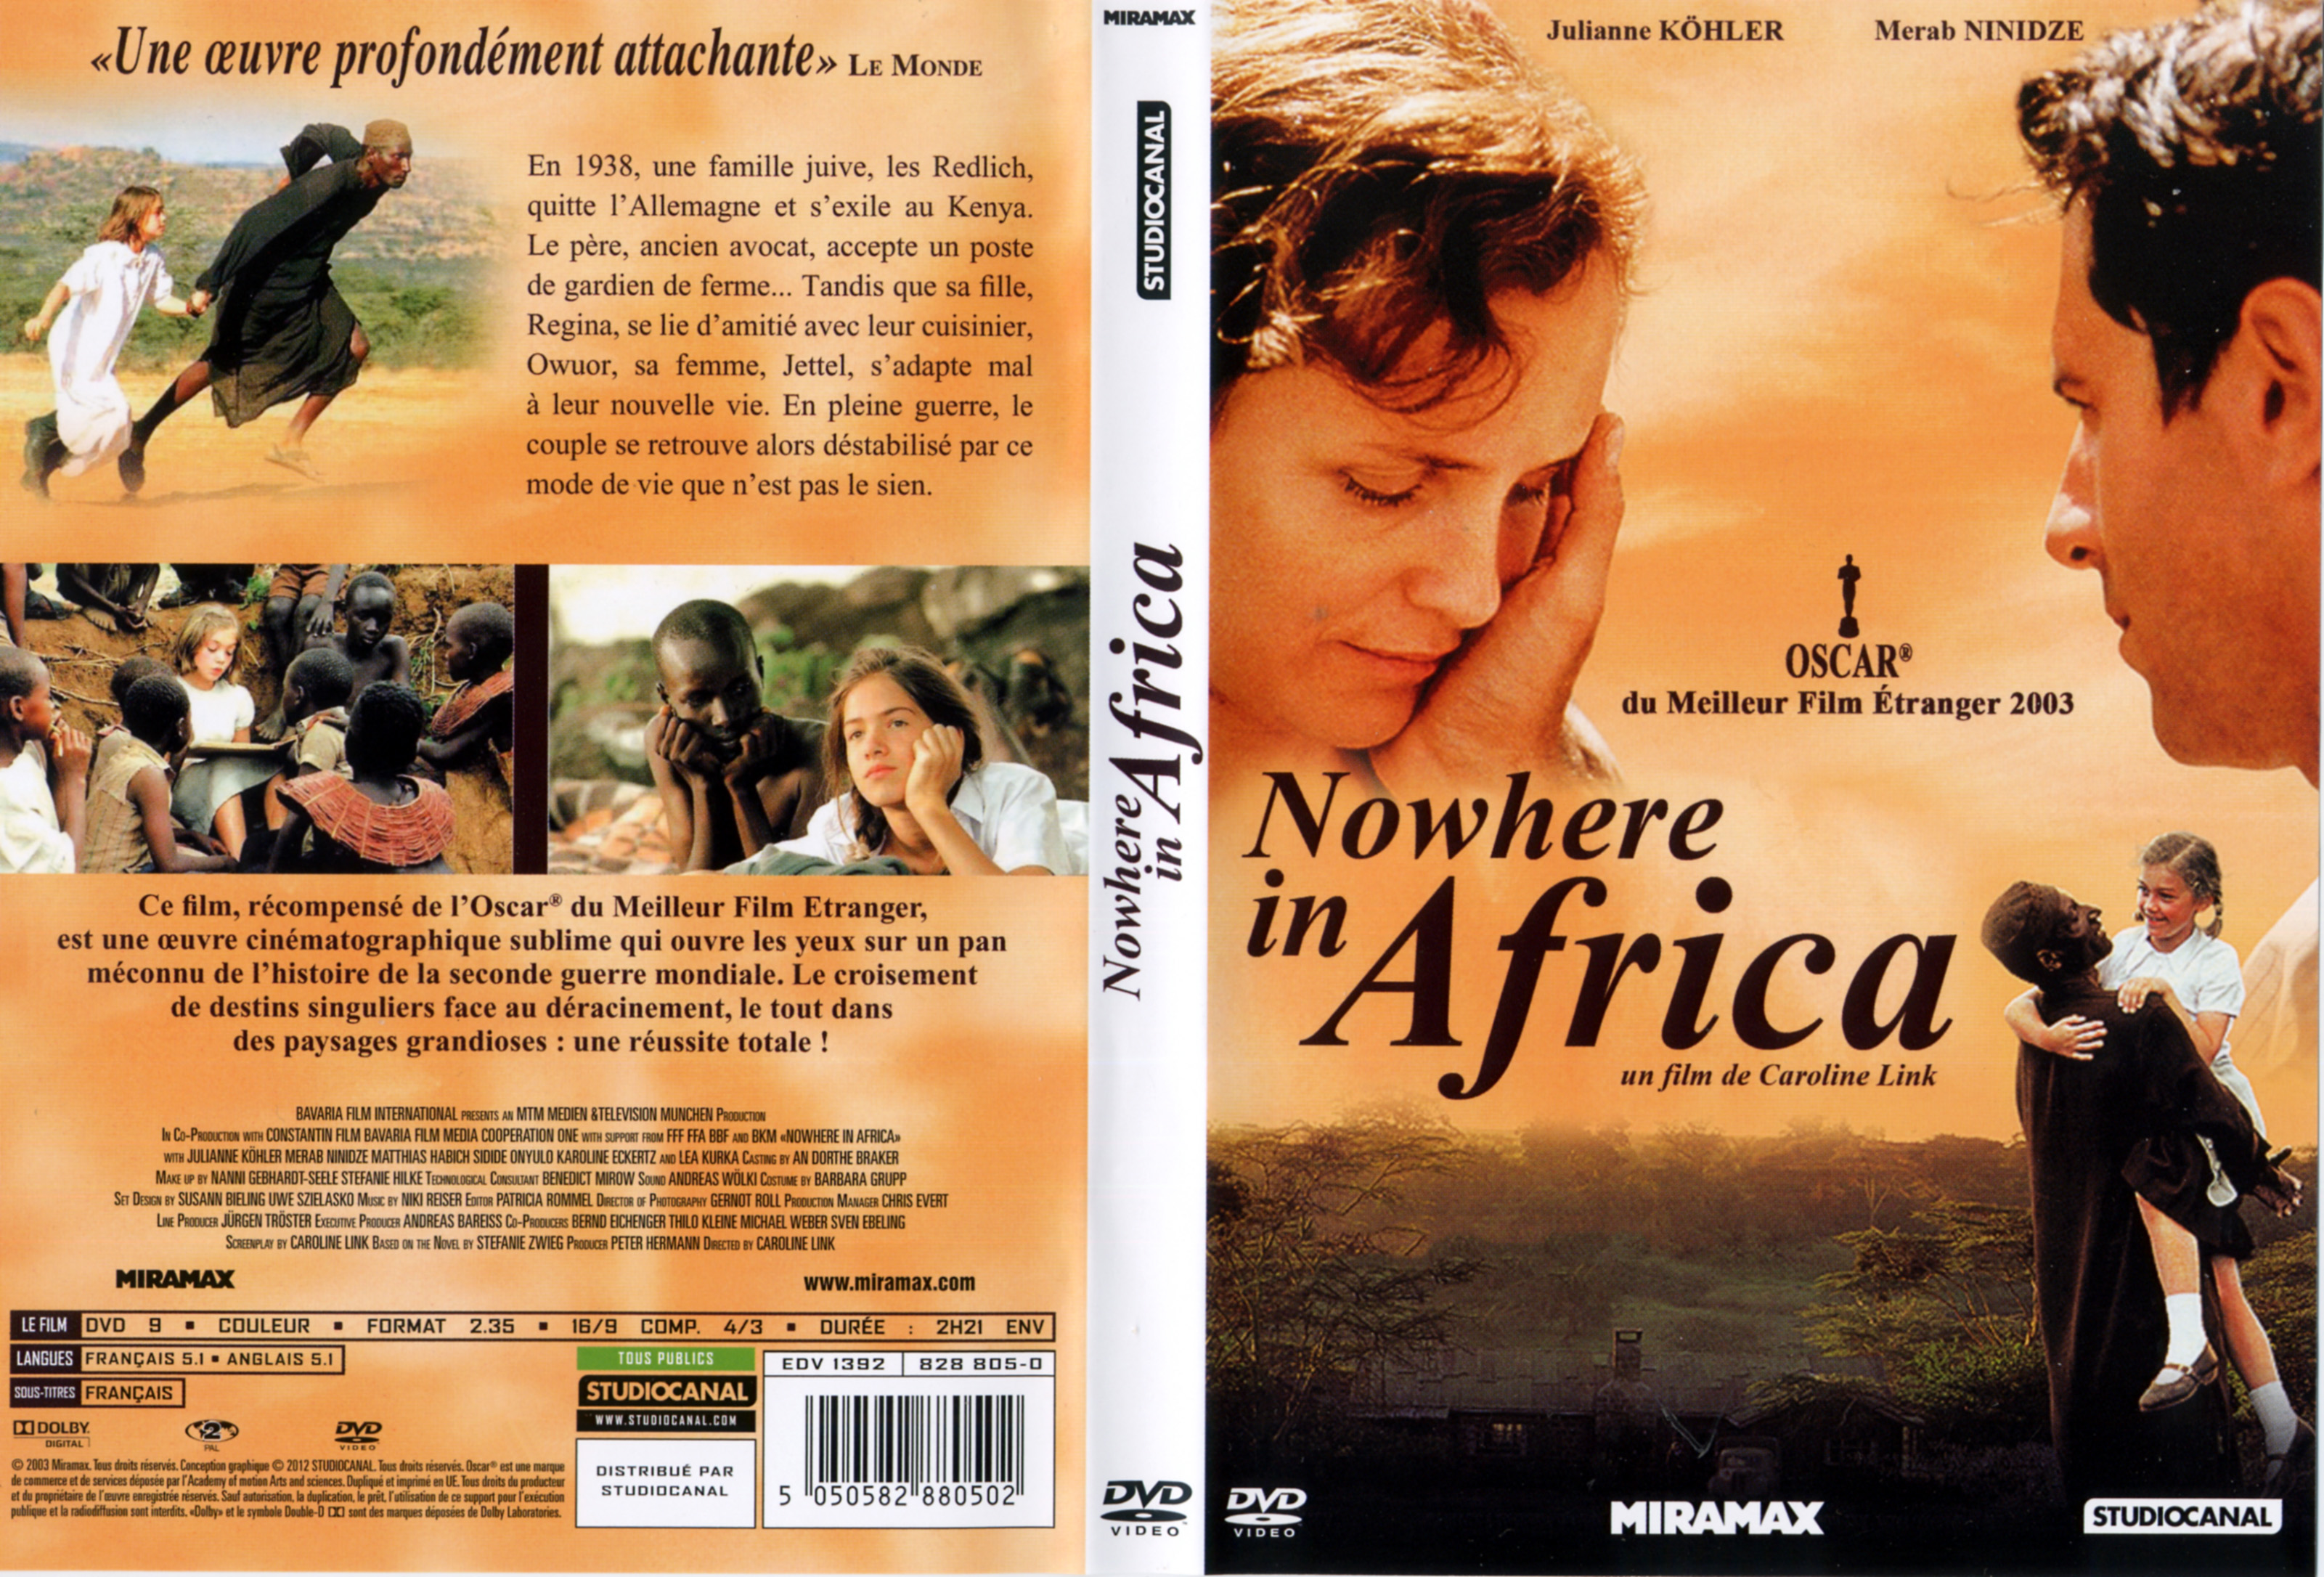 Jaquette DVD Nowhere in africa